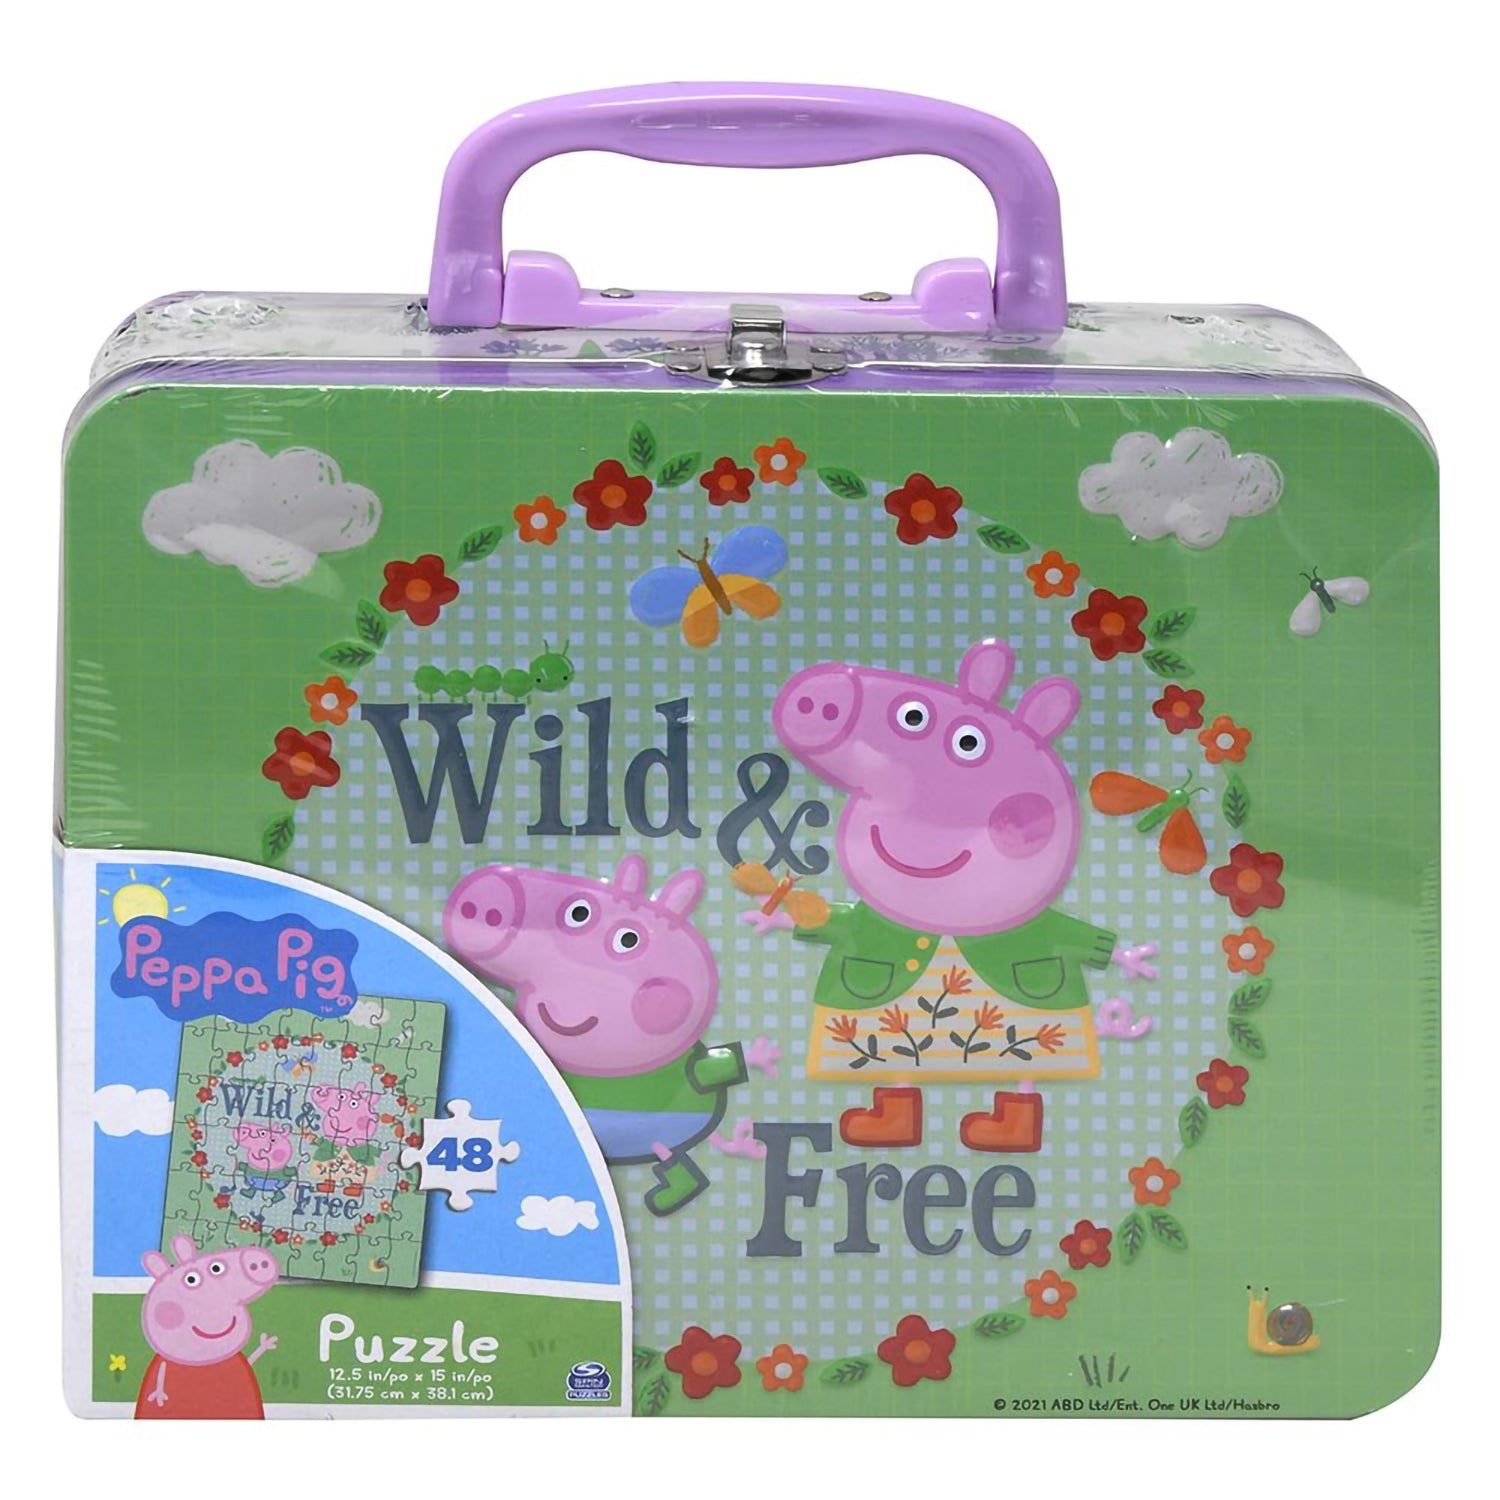 Peppa Pig 48 Piece Puzzle in Tin Box